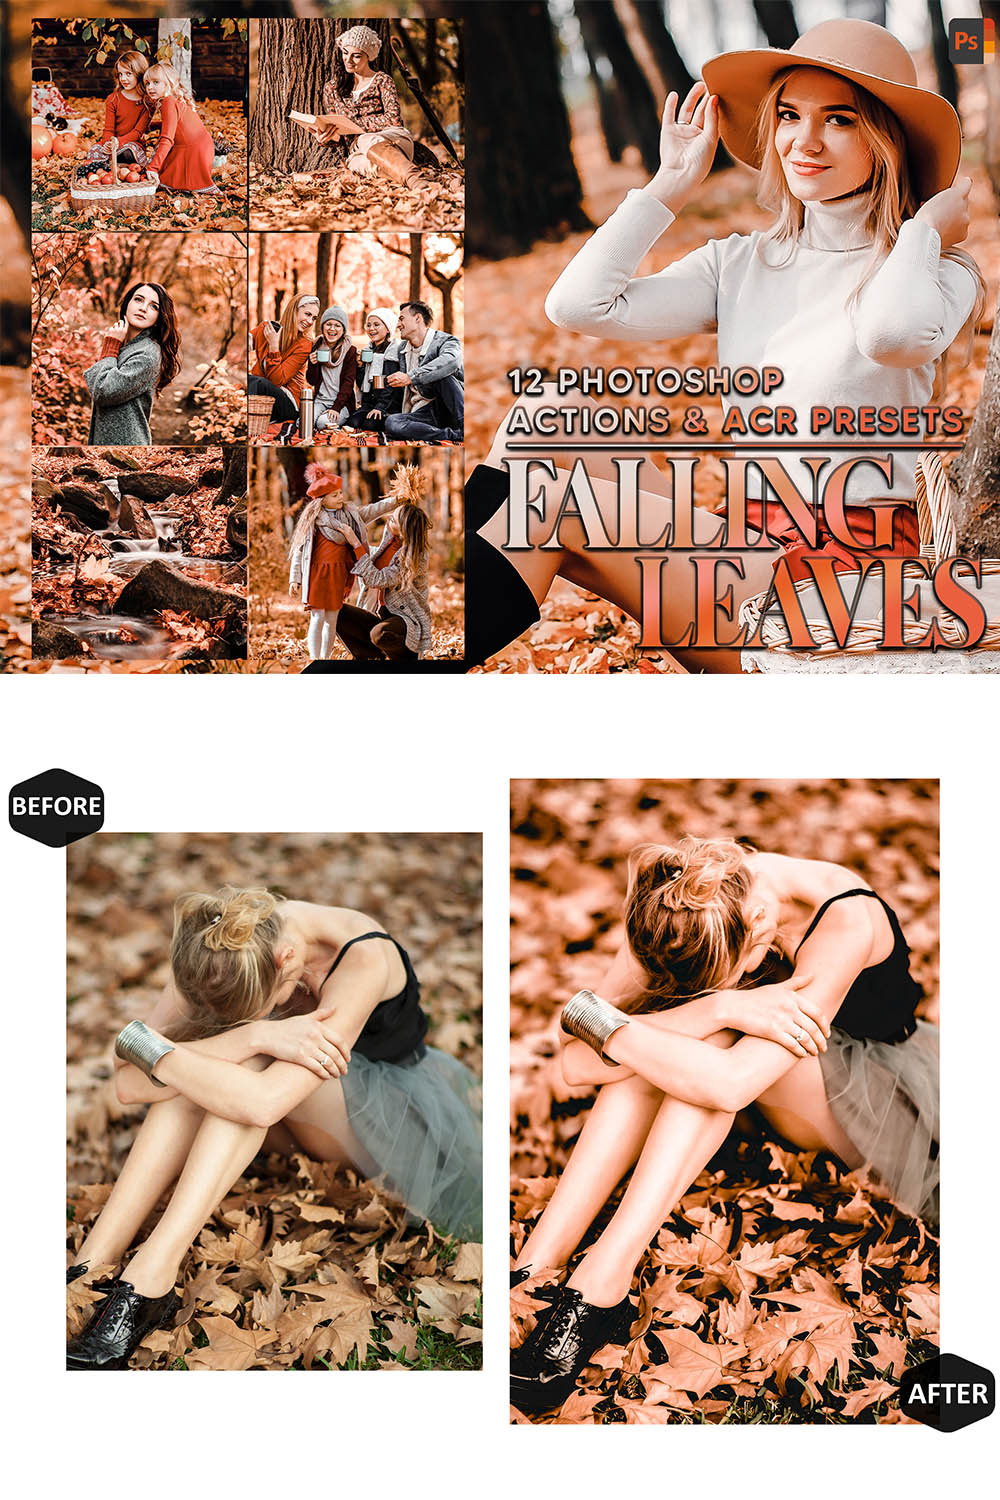 12 Photoshop Actions, Falling Leaves Ps Action, Autumn Leaf ACR Preset, Fall Moody Ps Filter, Portrait And Lifestyle Theme For Instagram, Blogger pinterest preview image.